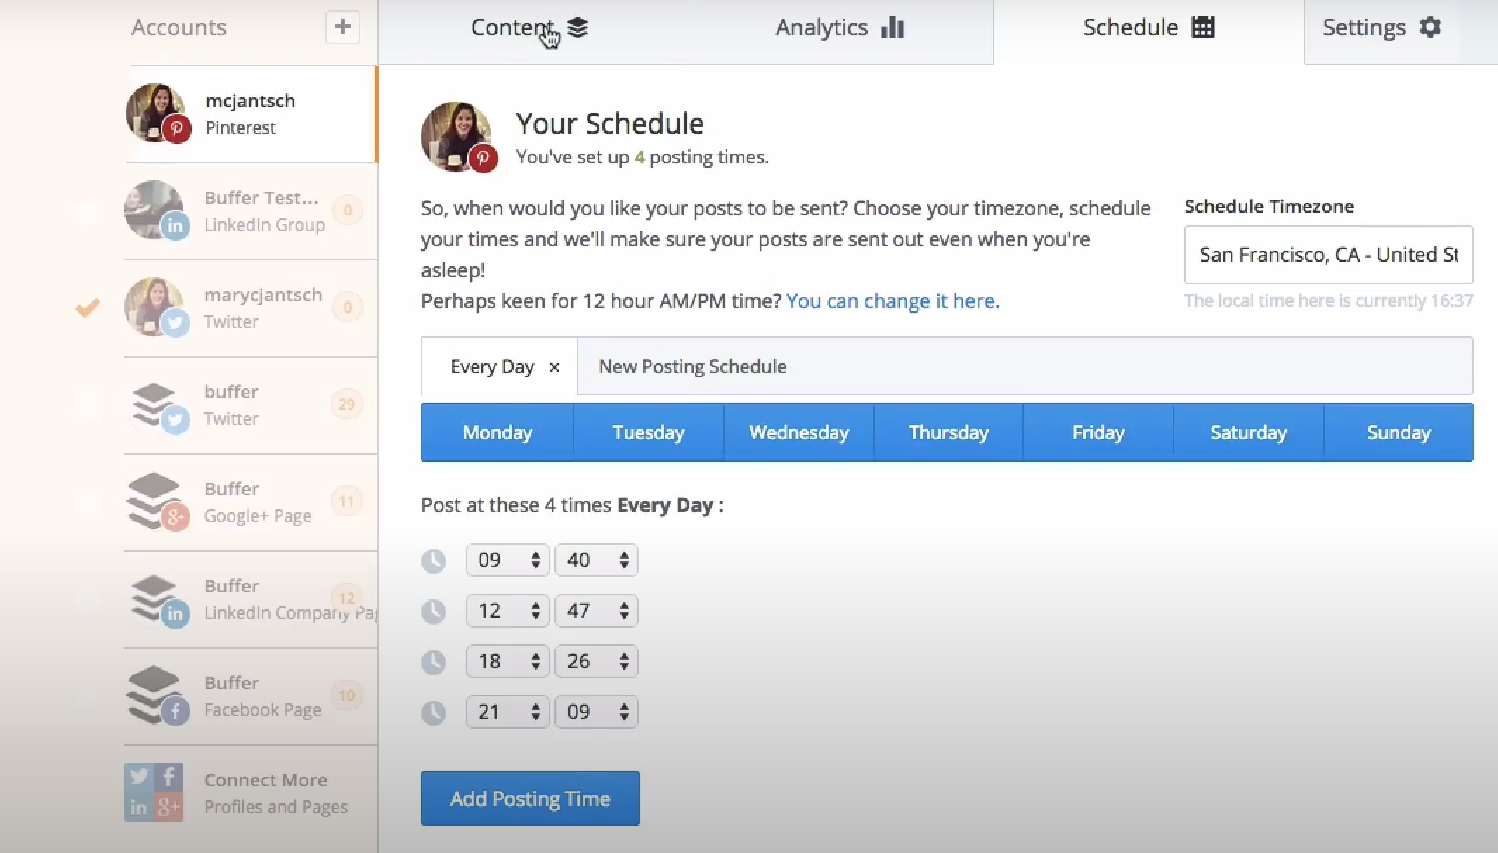 Buffer social calendar helps organize and visualize your Pinterest share schedule